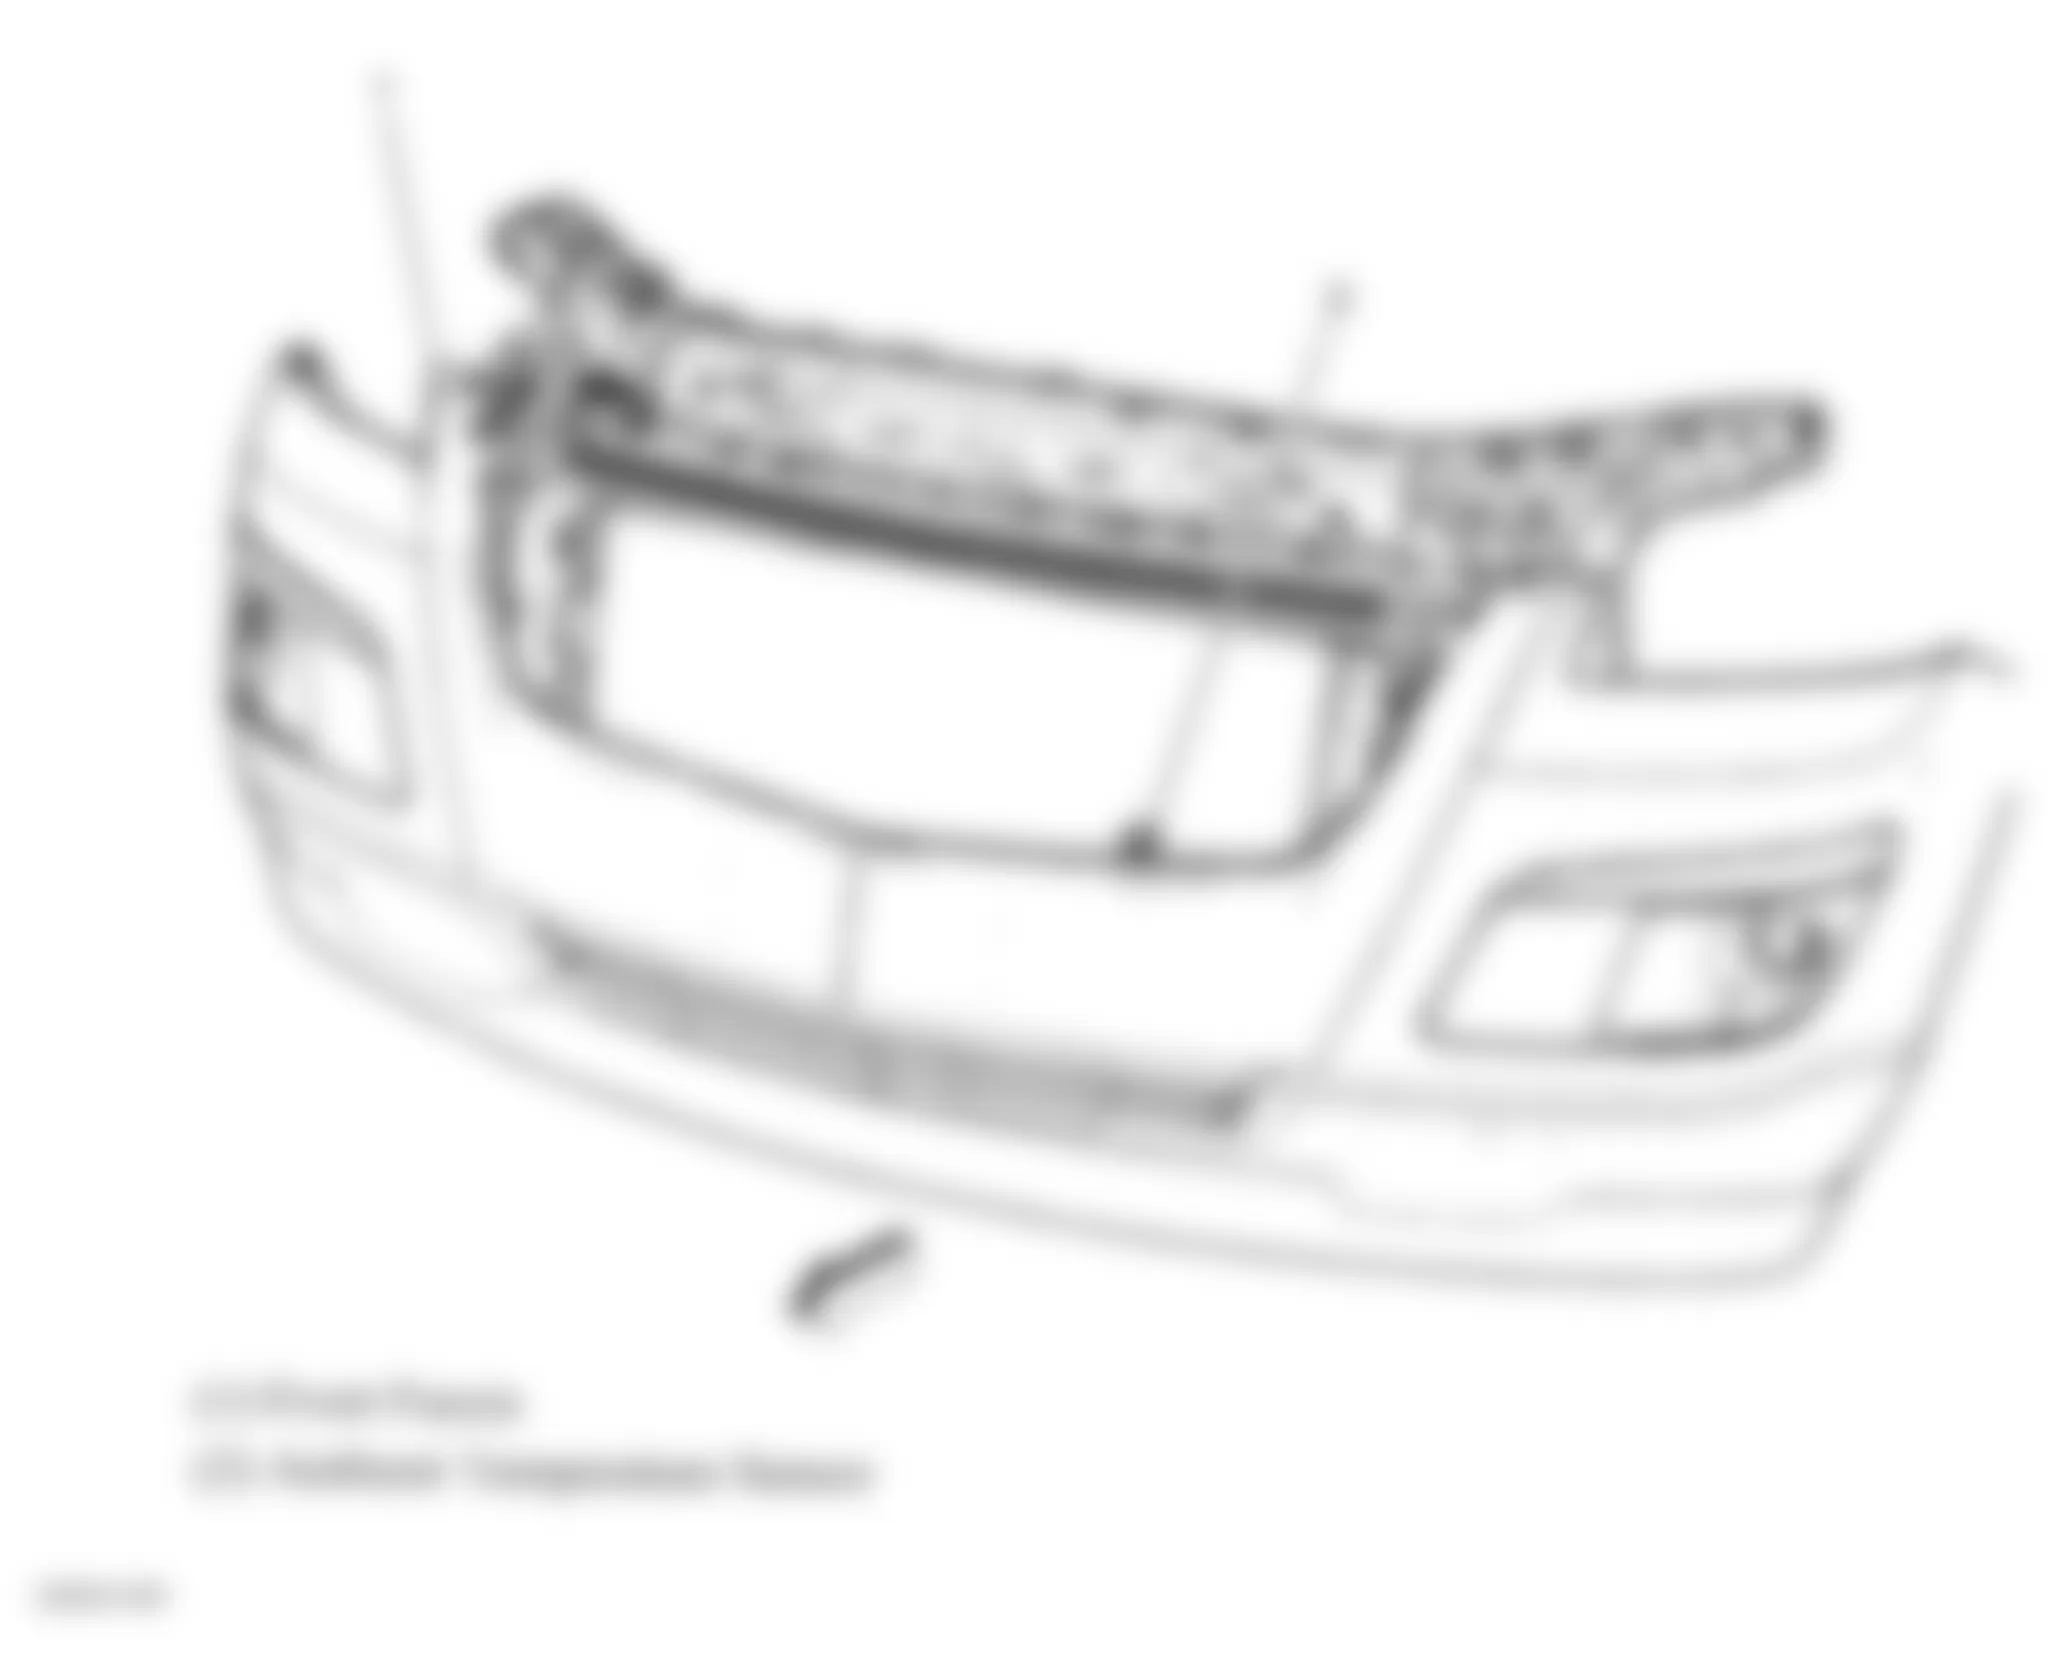 Buick Enclave CXL 2009 - Component Locations -  Behind Front Fascia